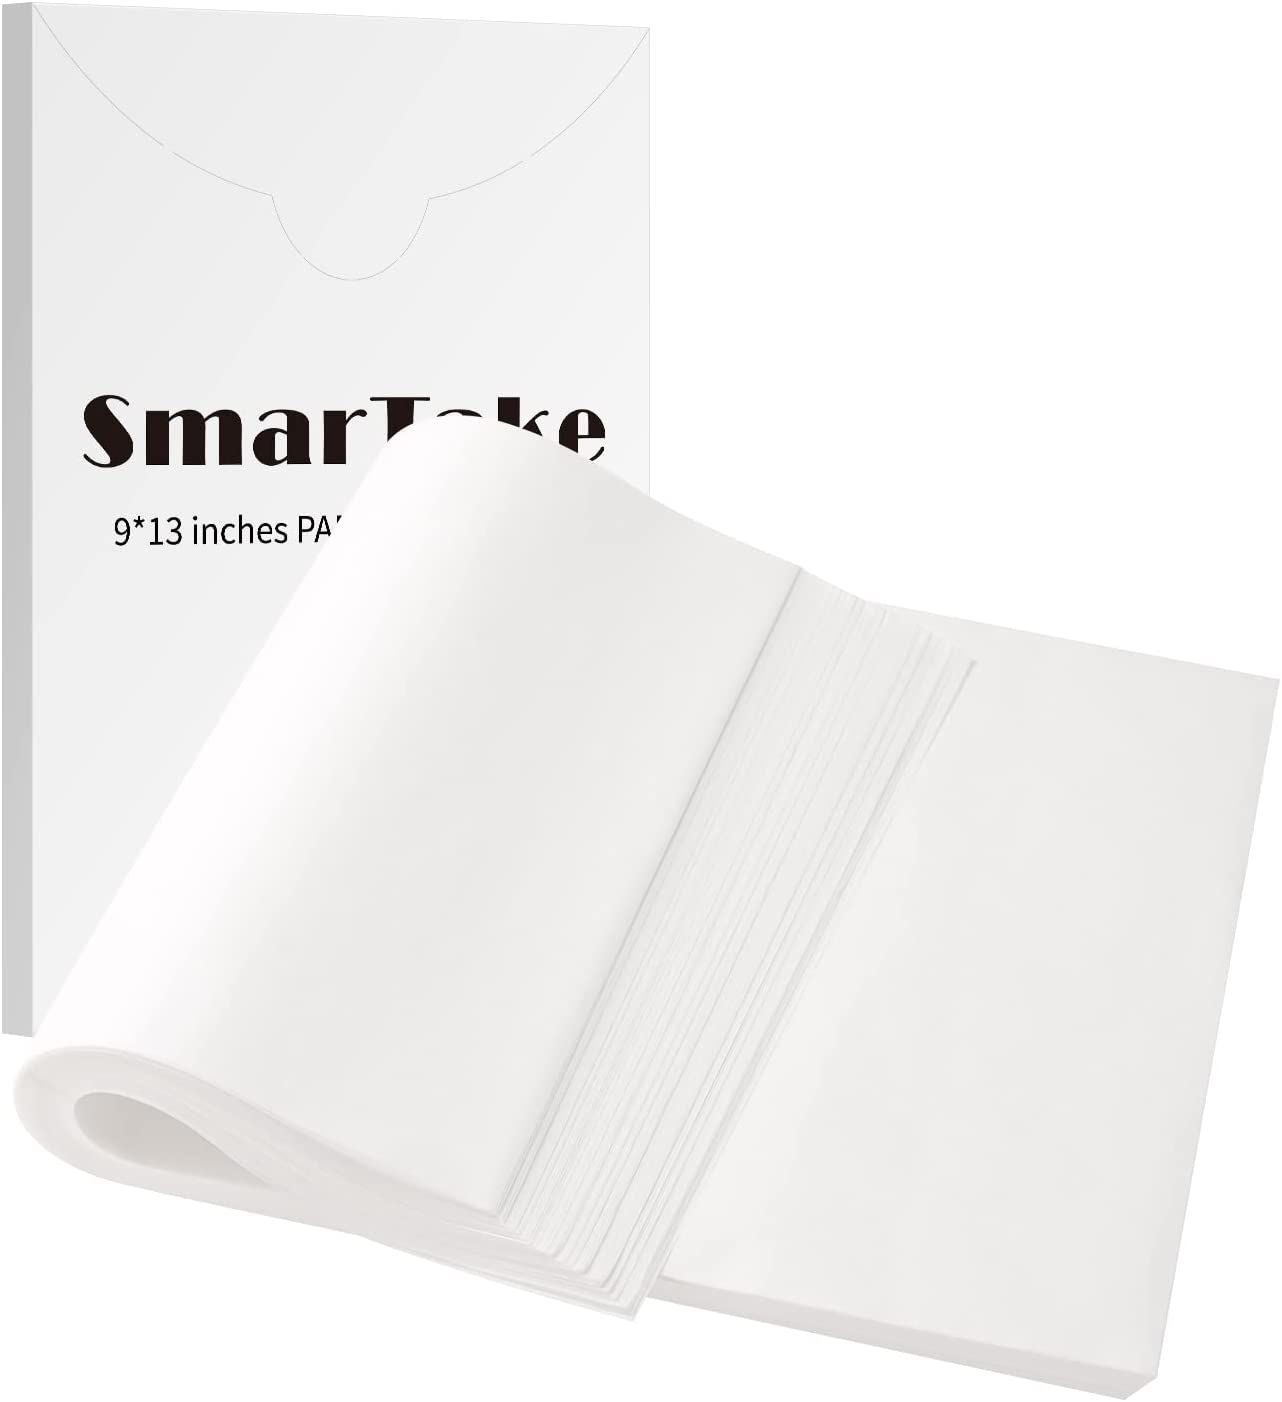 400-Count SmarTake 9"x13" Parchment Paper Sheets (White) $12.60, 500-Count SmarTake 12"x12" Wax Paper (Red Plaid) $10 w/ S&S + Free Shipping w/ Prime or on $25+